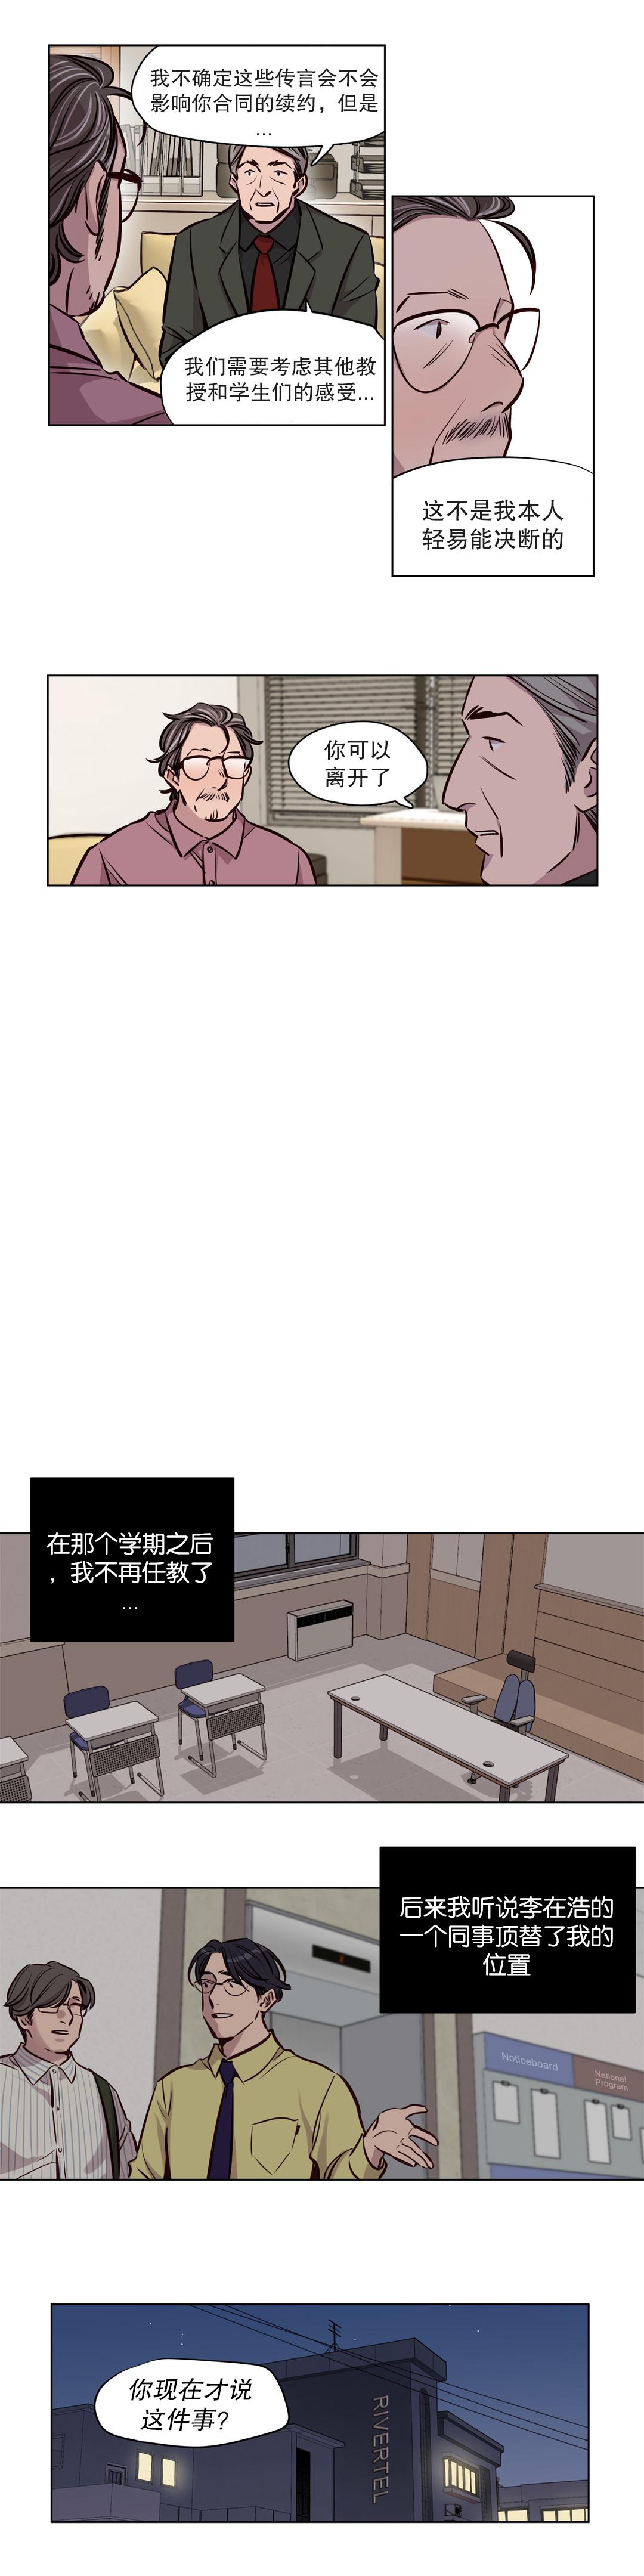 [Ramjak] 赎罪营(Atonement Camp) Ch.50-51 (Chinese) 4